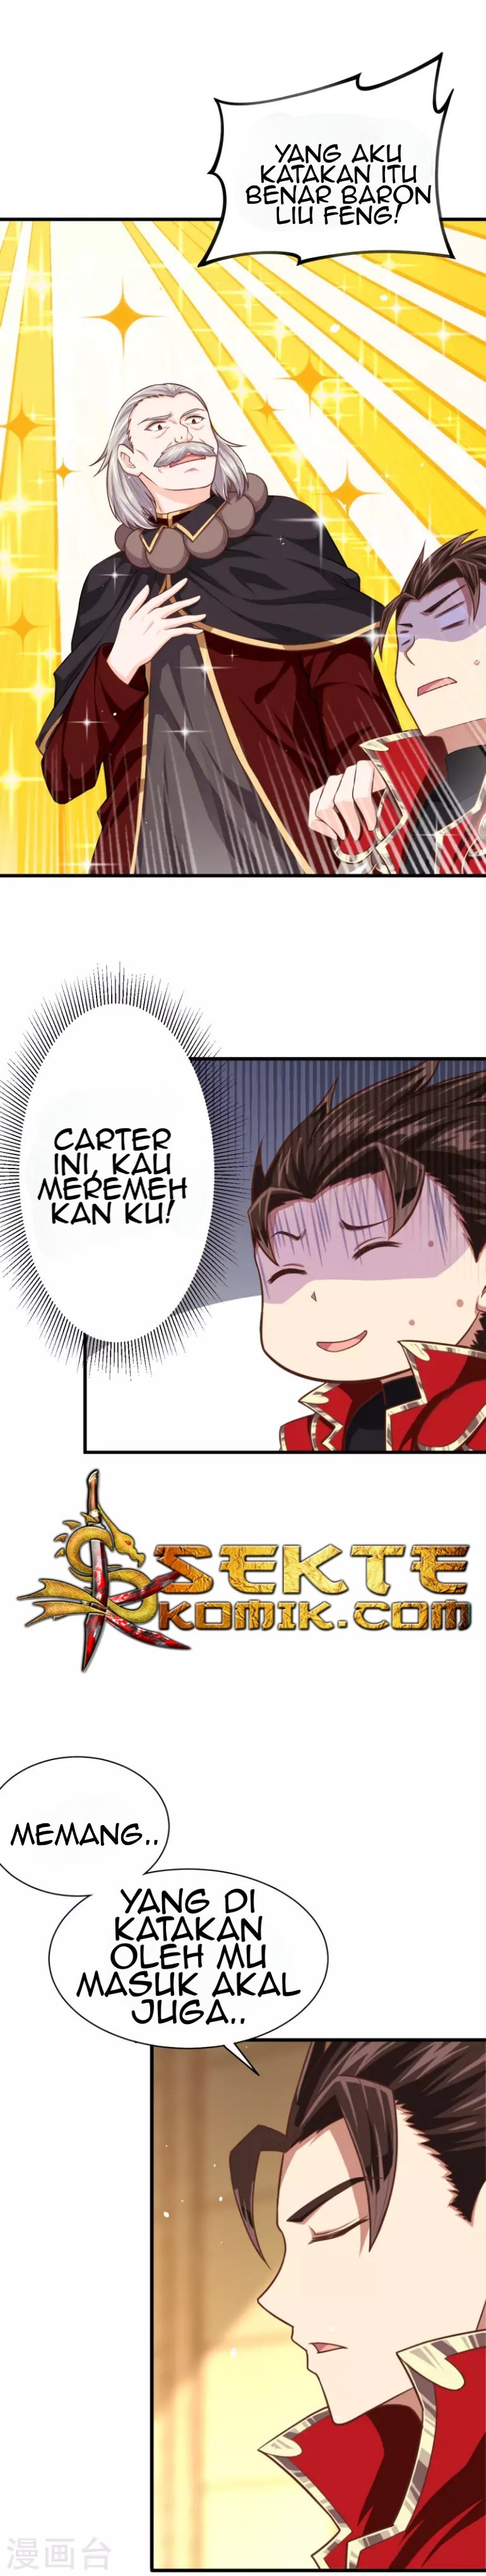 To Be The Castellan King Chapter 44 12